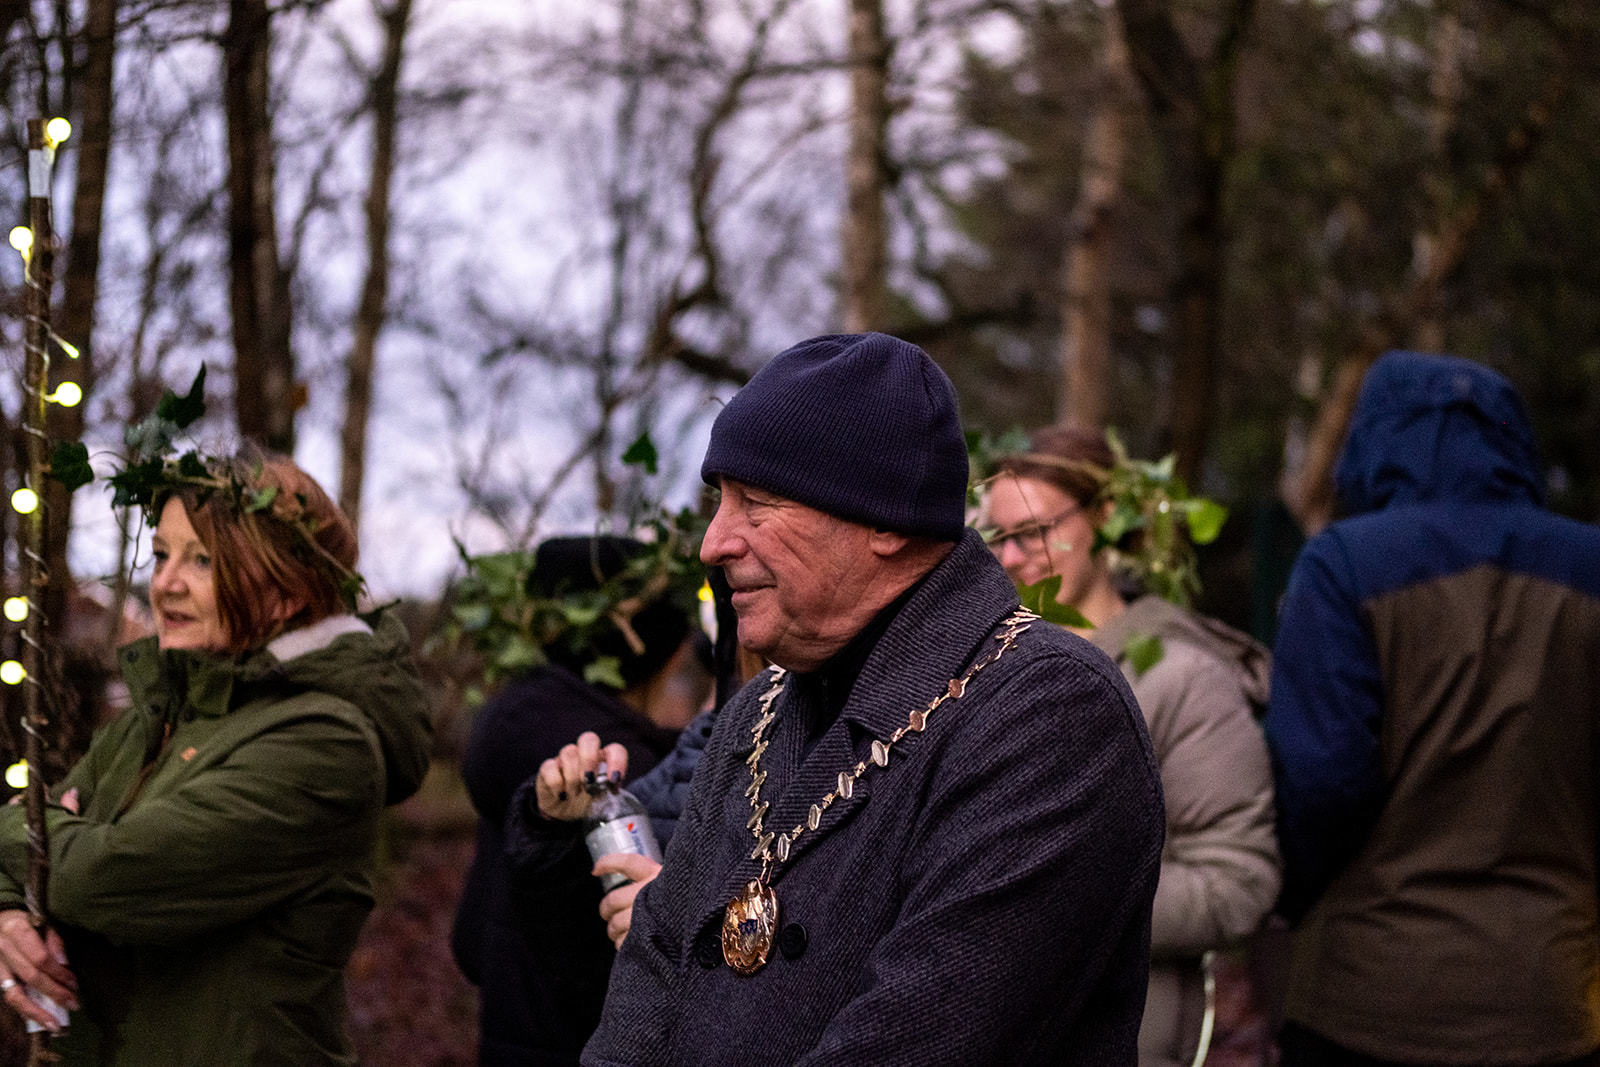 The mayor of Halewood smiling, behind him people are wearing headrests made of leaves, one is carrying a stick wrapped with lights.